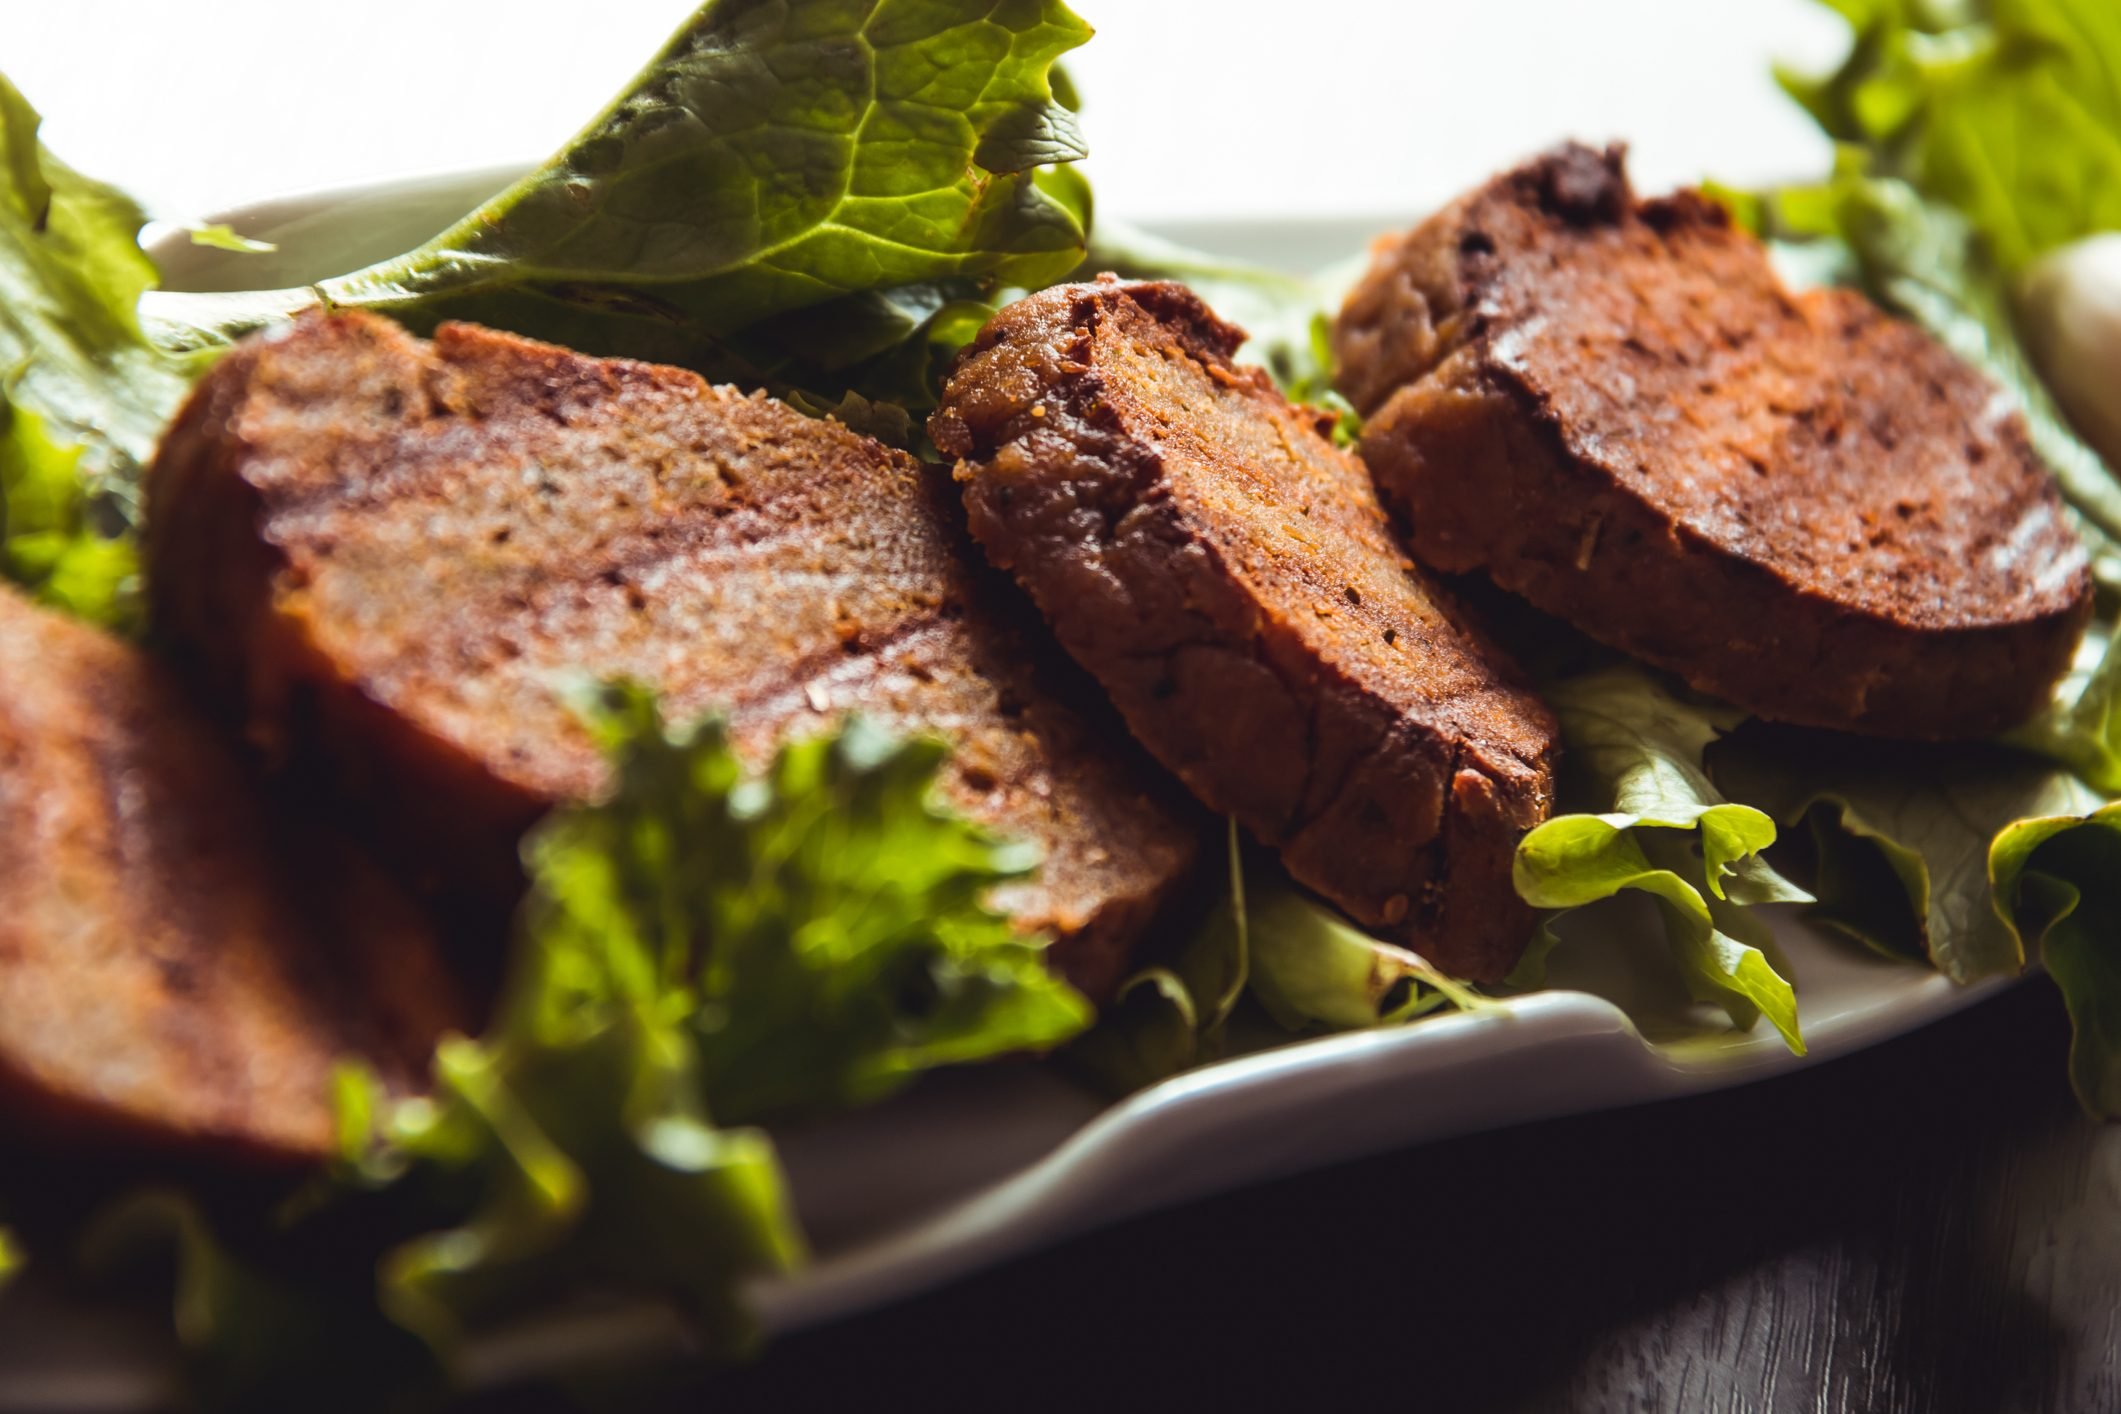 cooked seitan on bed of lettuce